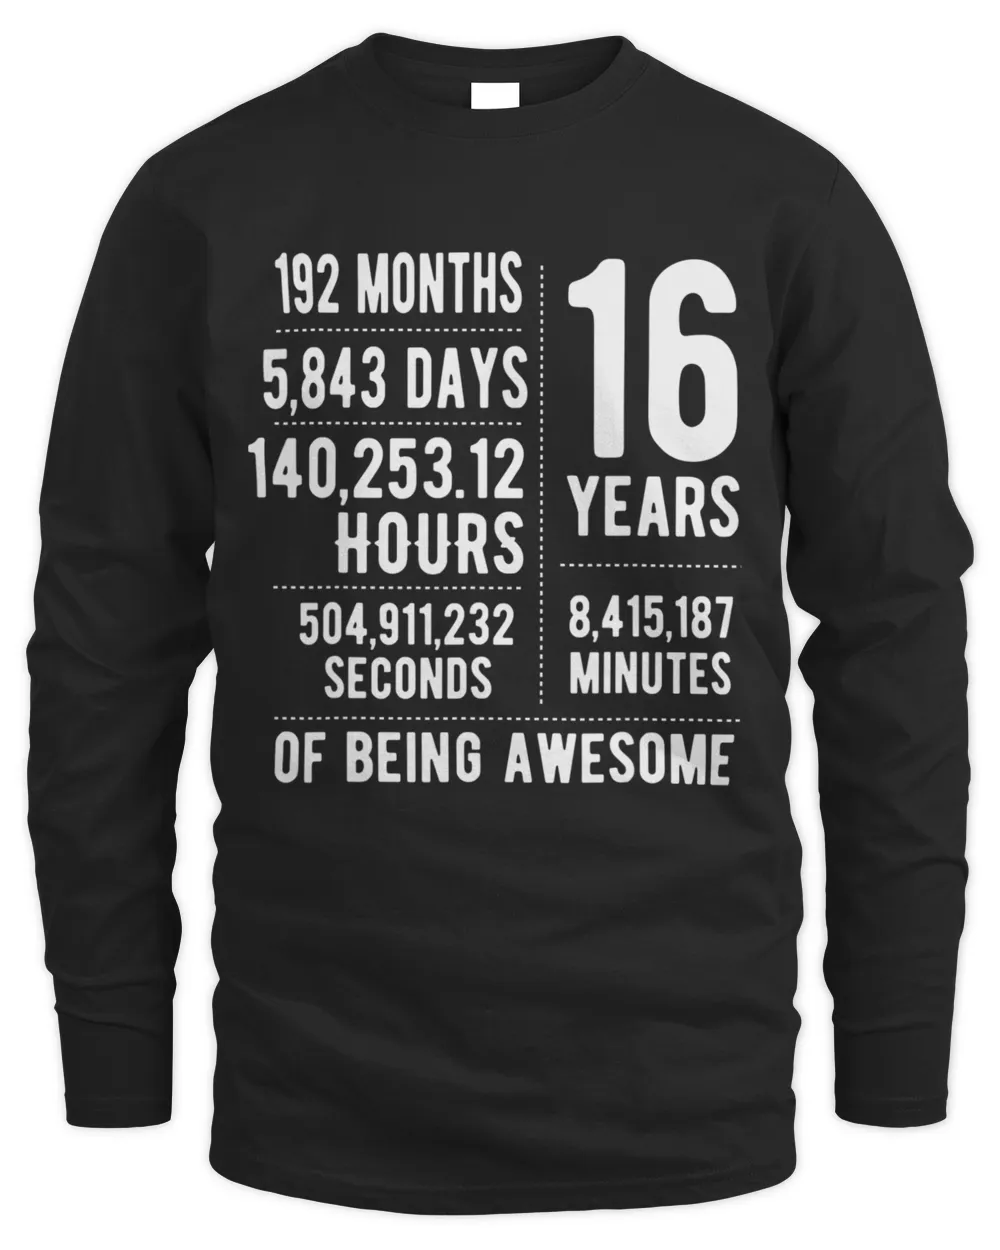 16th Birthday Gift Idea For Boys & Girls Funny 16 Years Old T Shirt Hoodie Sweater